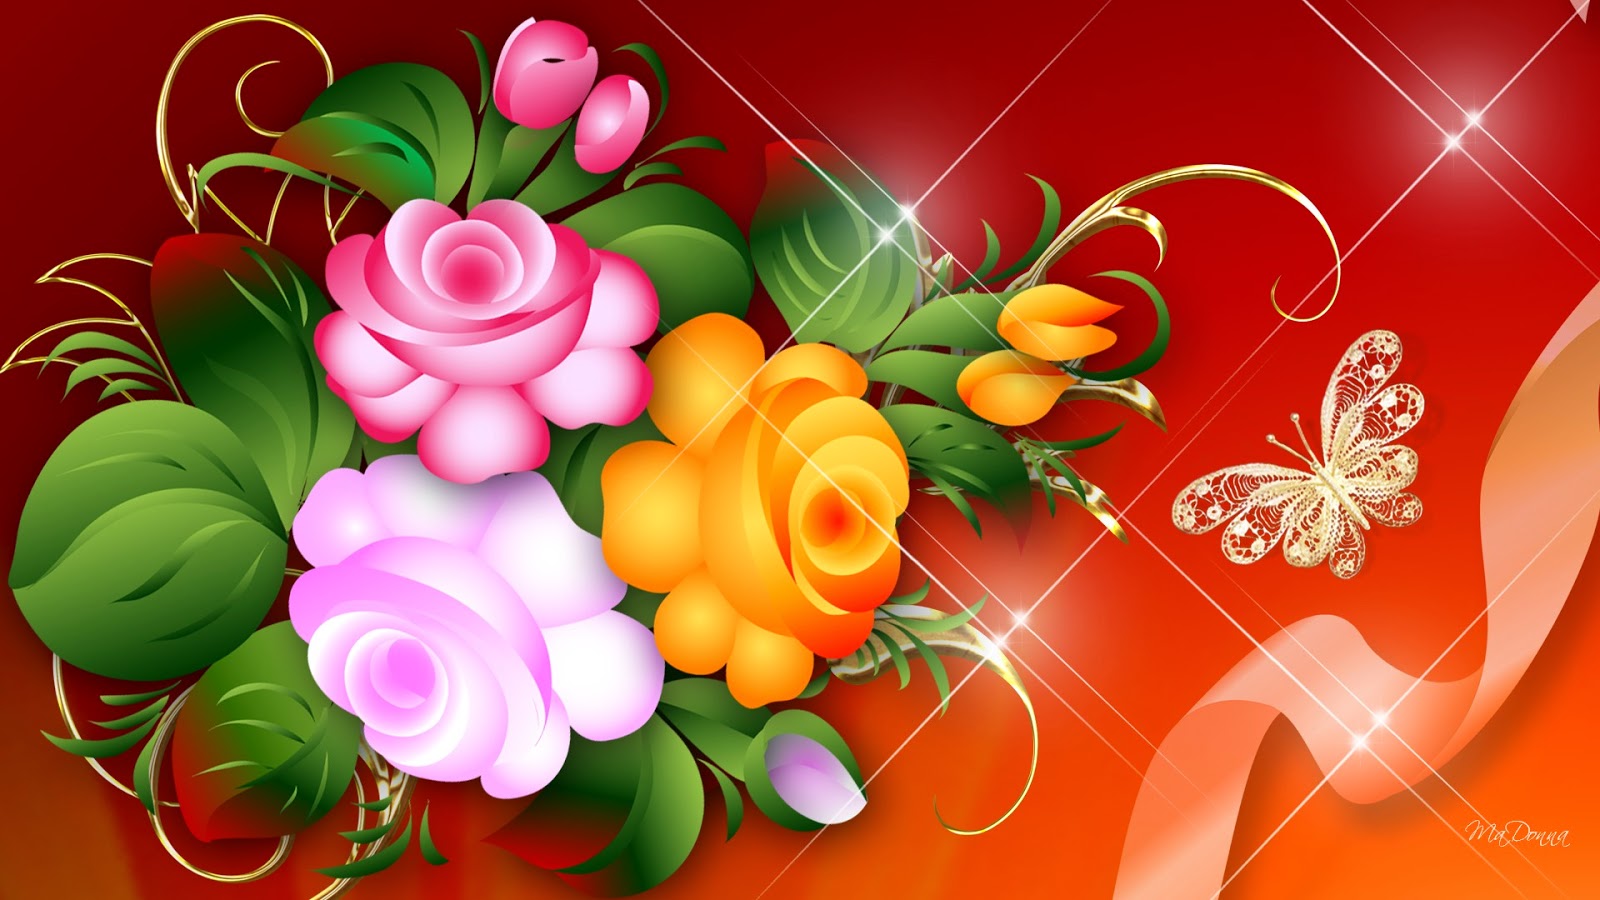 Bright Flower Wallpaper In High Resolution For Get